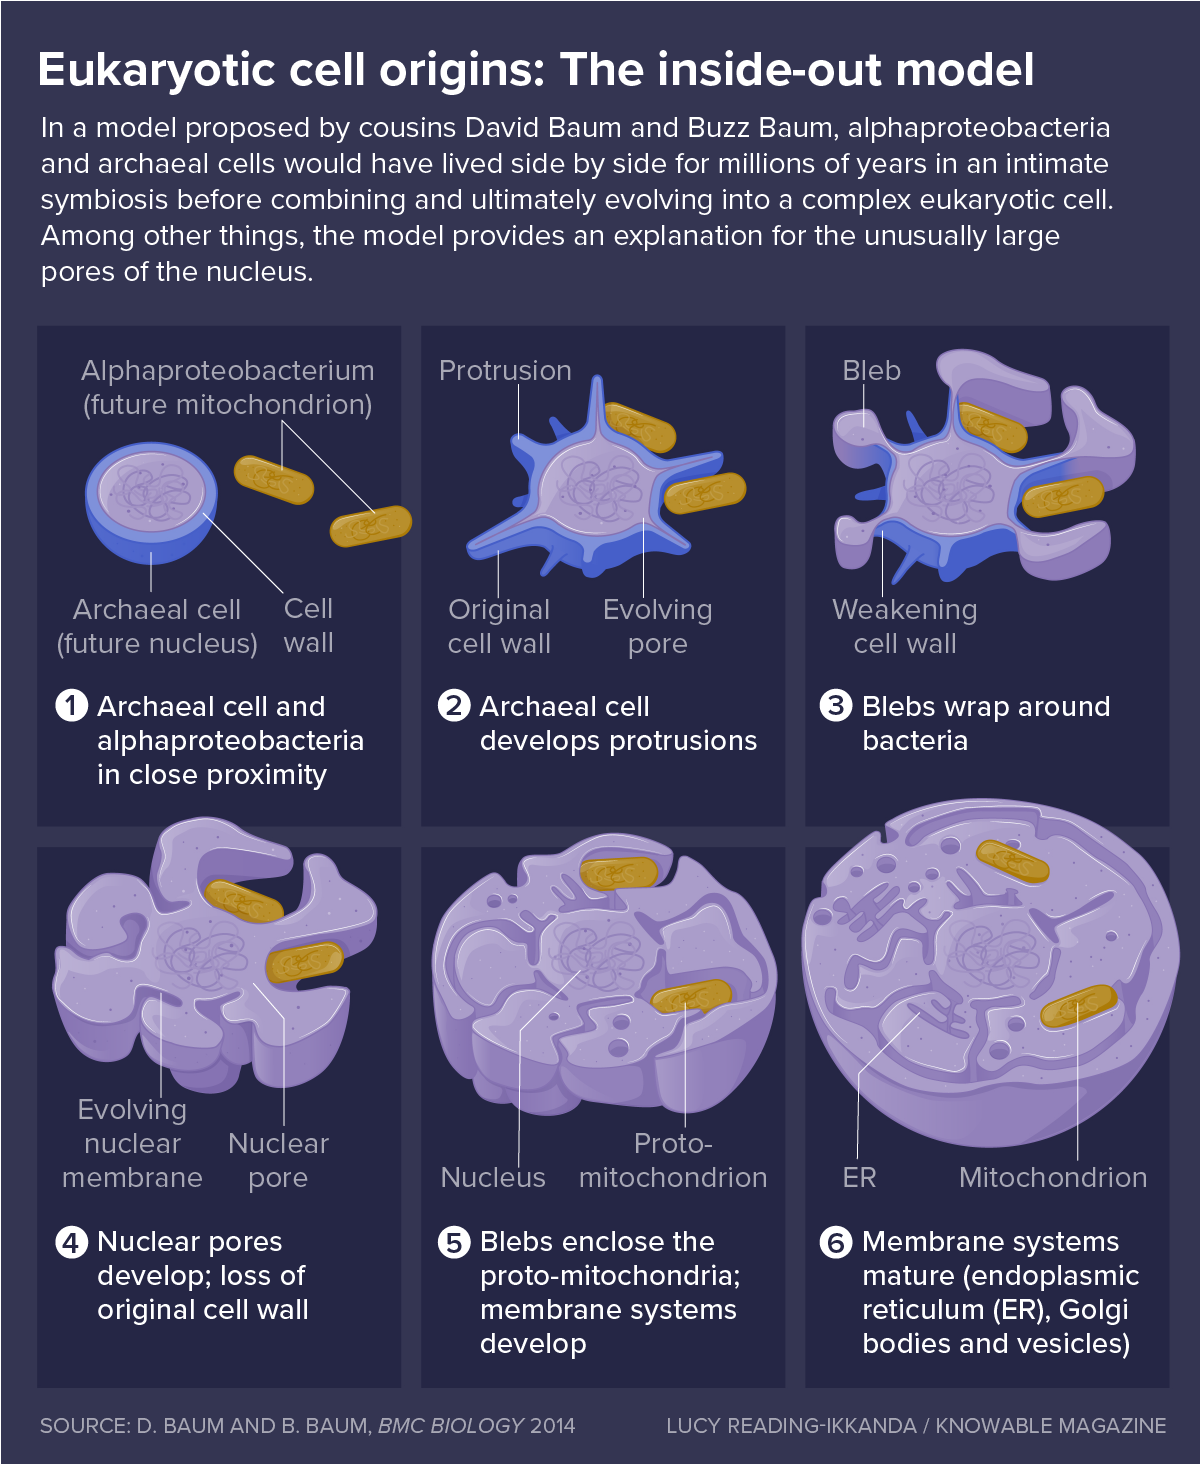 A graphic walks us through the steps of the inside-out model for the evolution of cellular organelles, as conceived by the Baums.